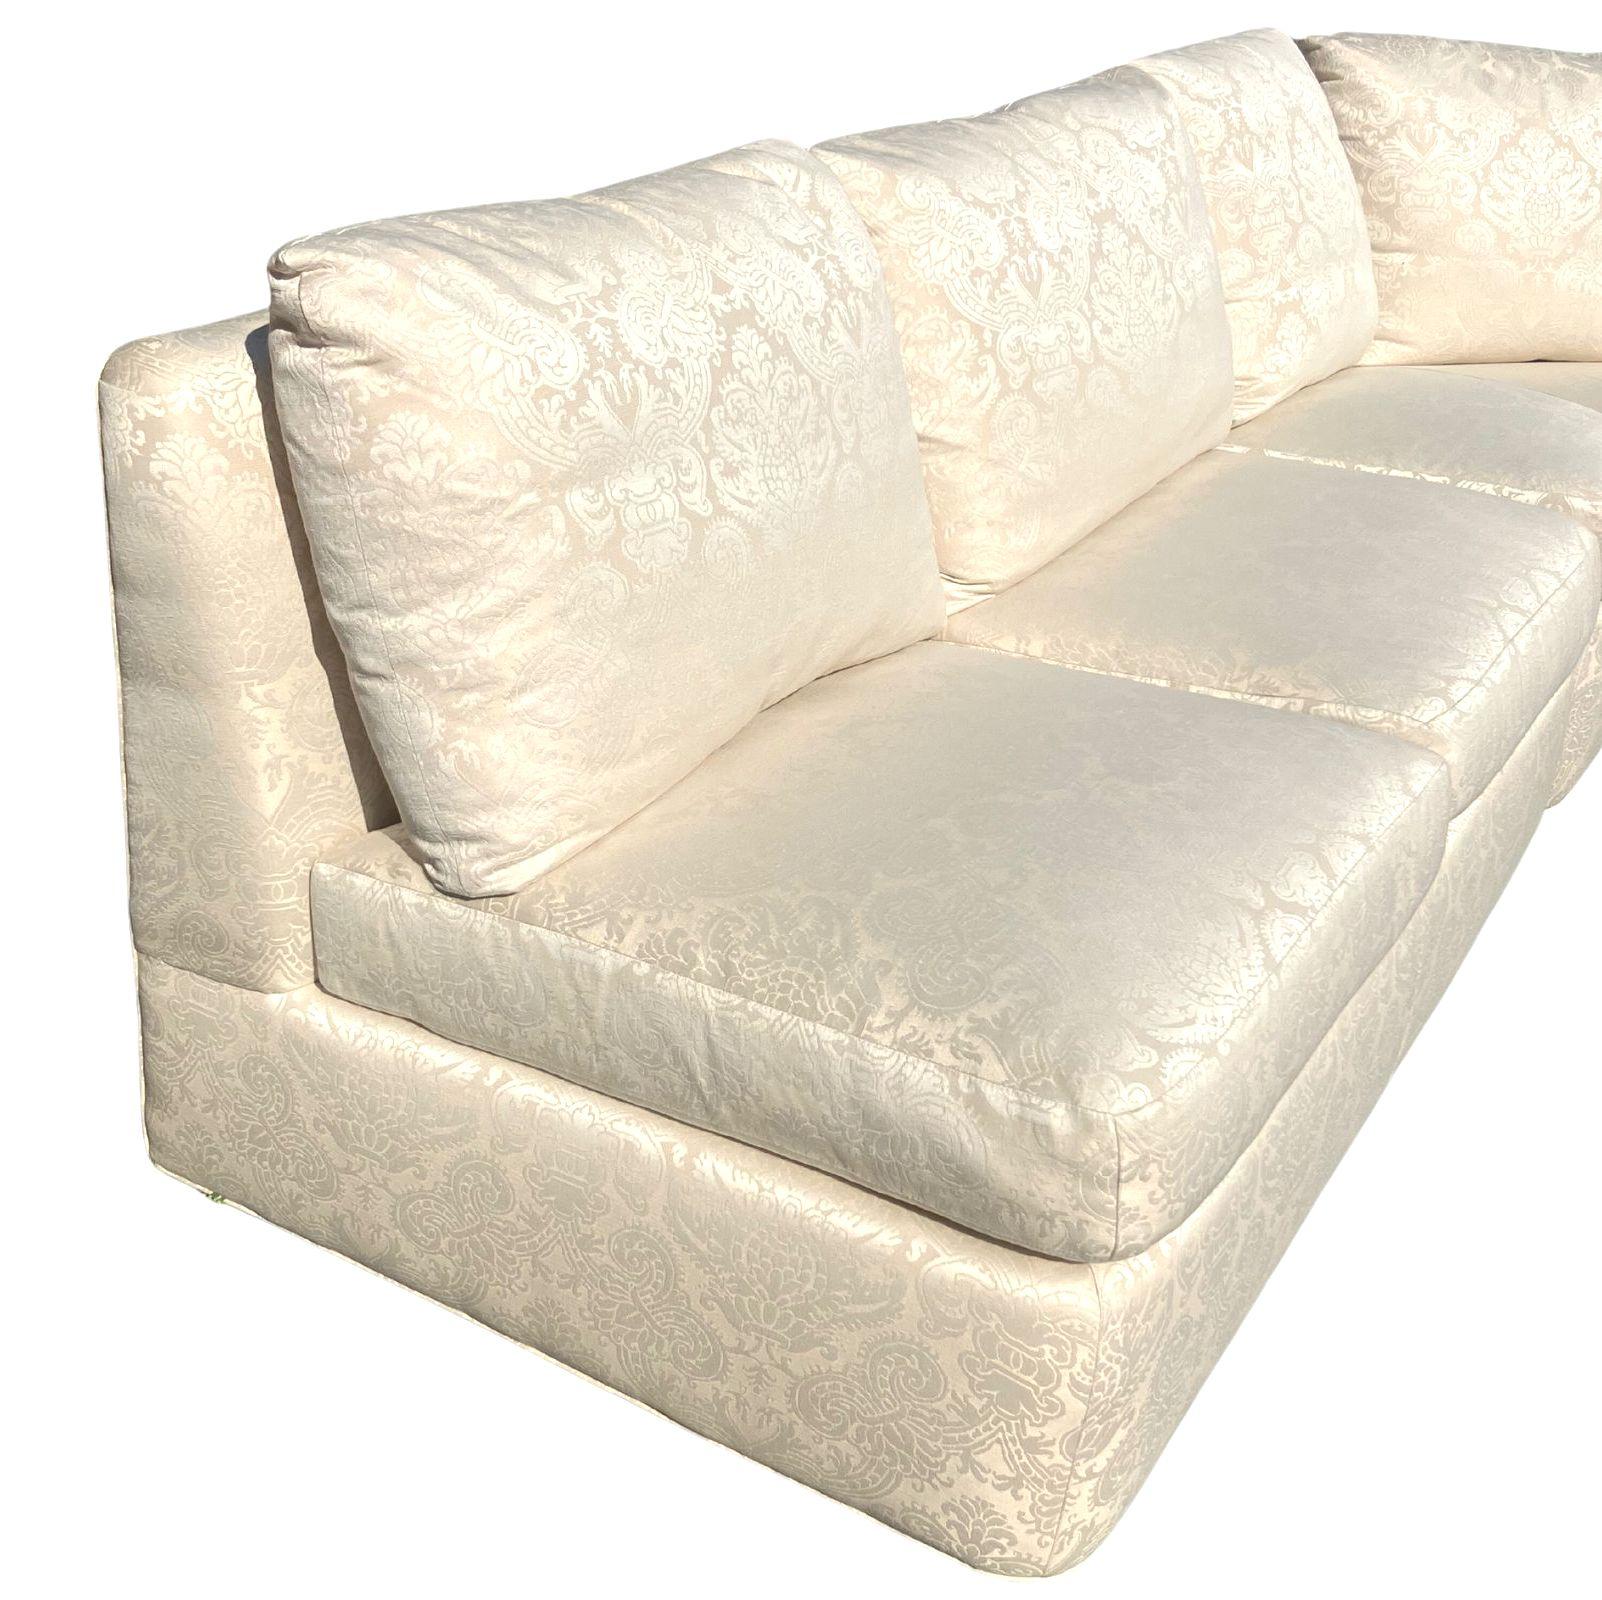 BAKER Mid 20th Century White Armless Three-Piece Sectional Slipper Sofa In Good Condition For Sale In Charlotte, NC